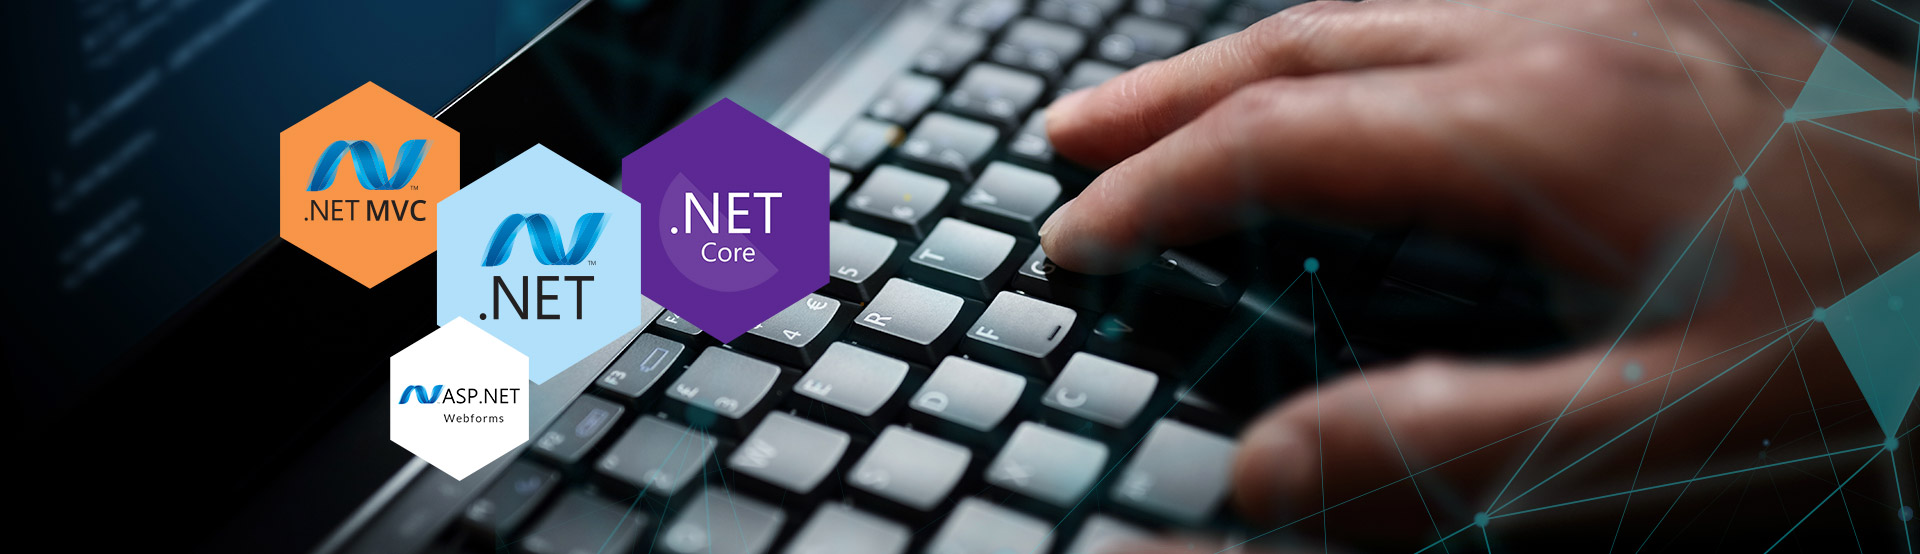 The Ultimate Guide To The Right DotNet Framework For Your Project